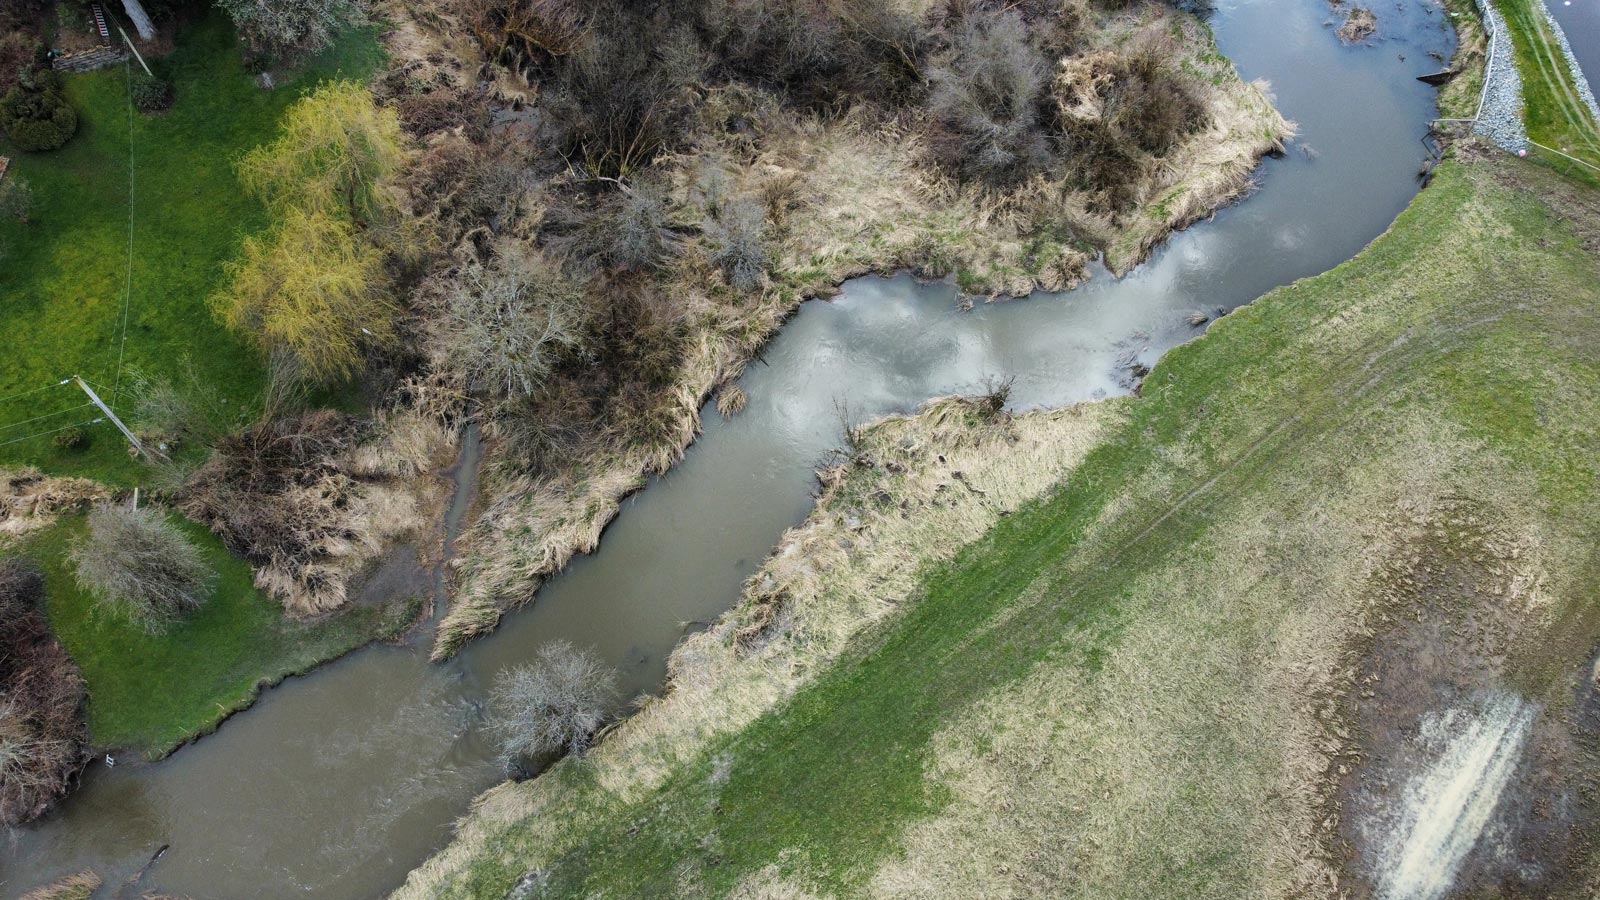 Riparian zones, which run between the shore and the upper banks of a river or stream, provide important habitat and help to control erosion. When these lands are healthy and connected through a corridor, they can support healthy, inclusive food systems. (Photo: Nerv Productions)